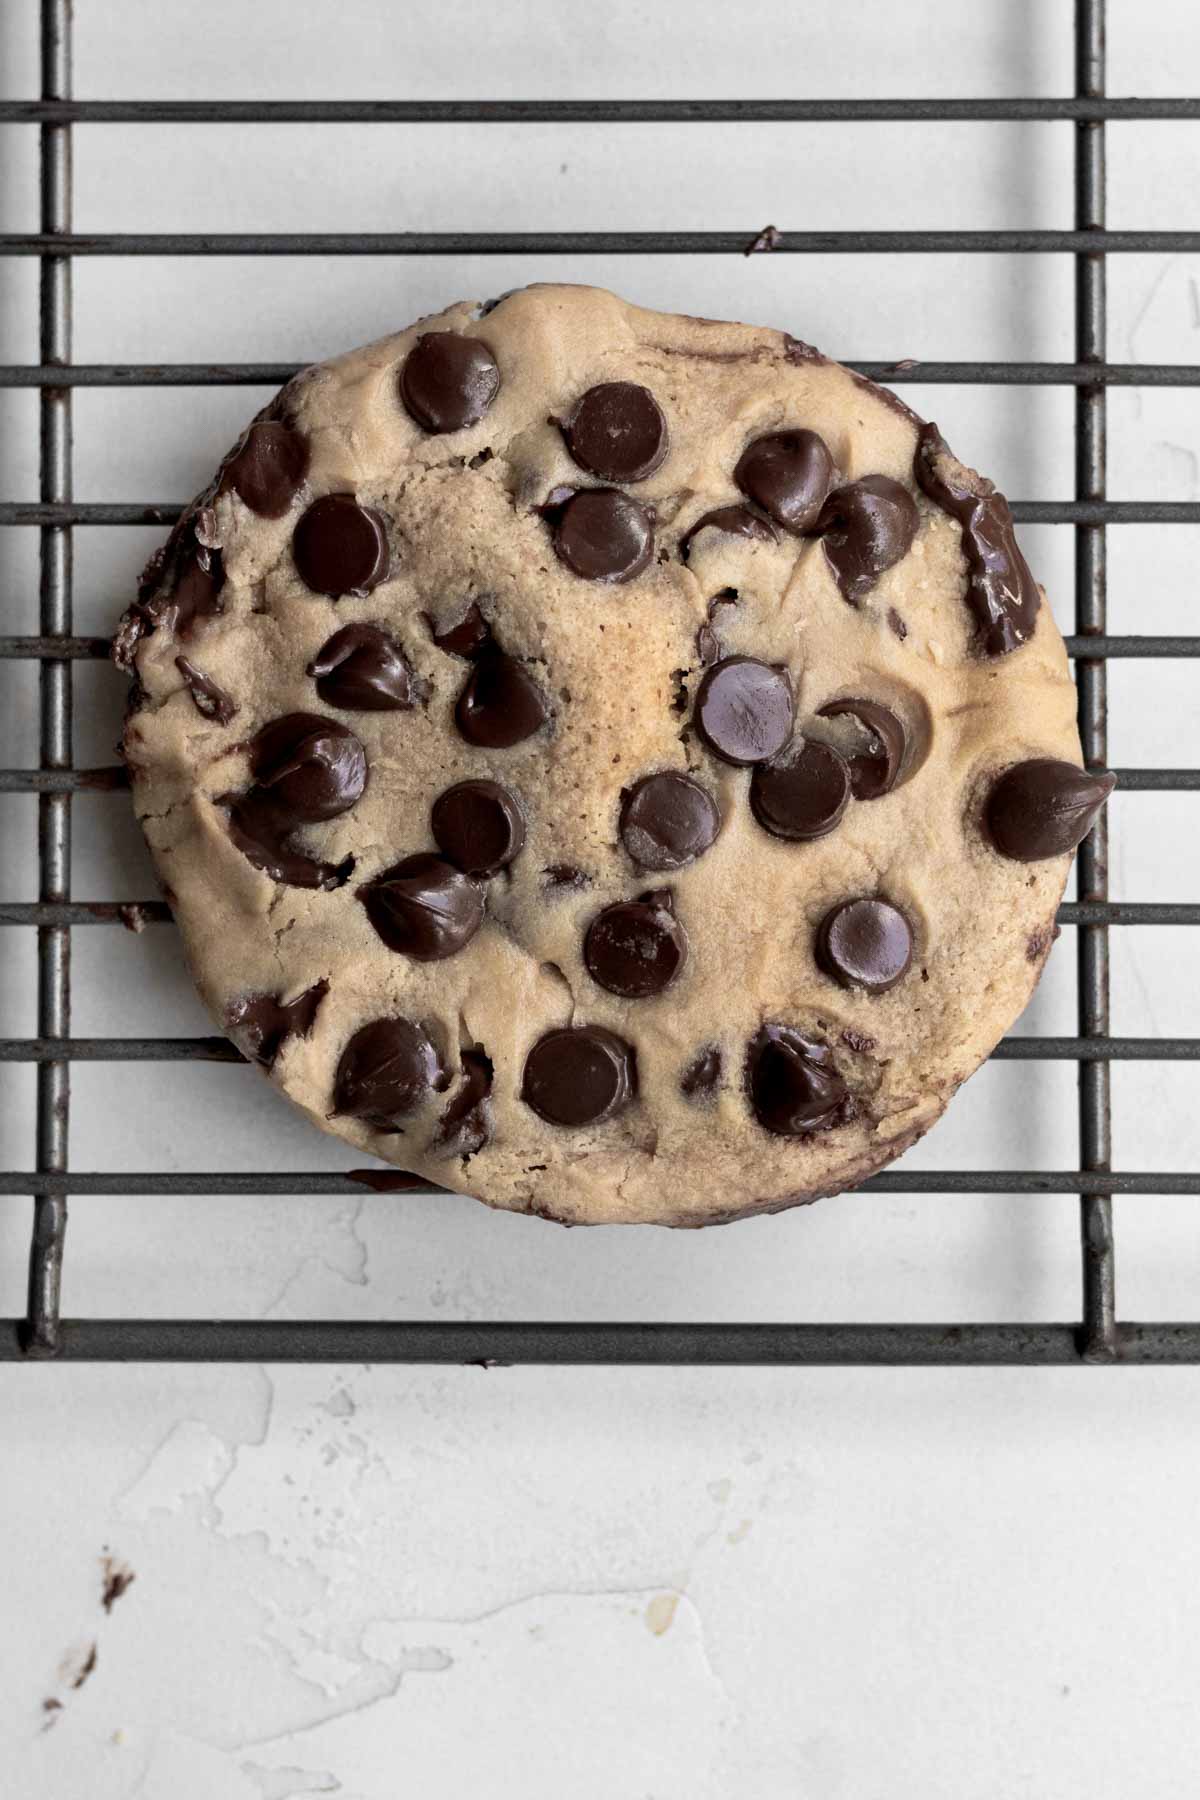 A fresh Microwave Chocolate Chip Cookie on a cooling rack.